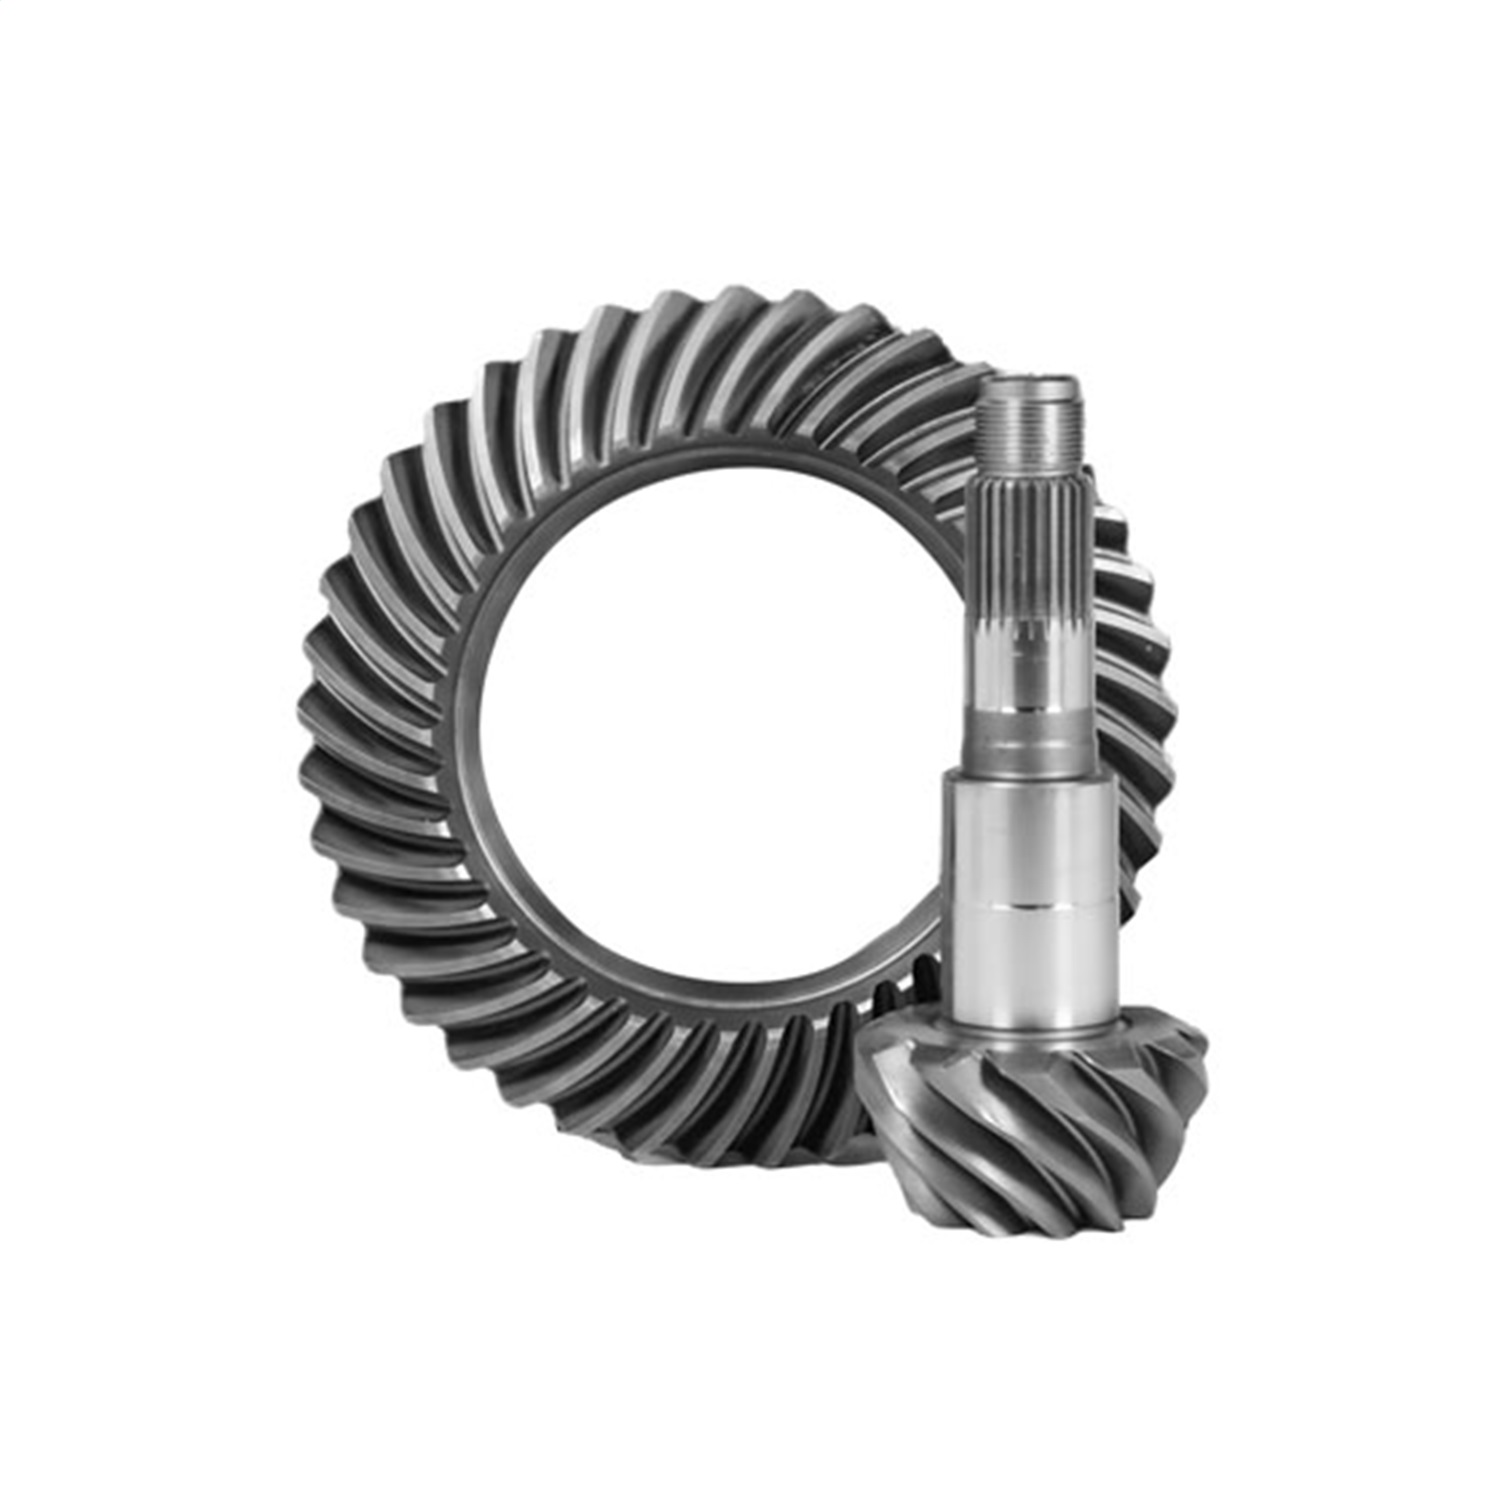 USA Standard 12360 Gear Ring And Pinion Gear Set, For 2003-06 Sprinter Van, 3.31 Ratio